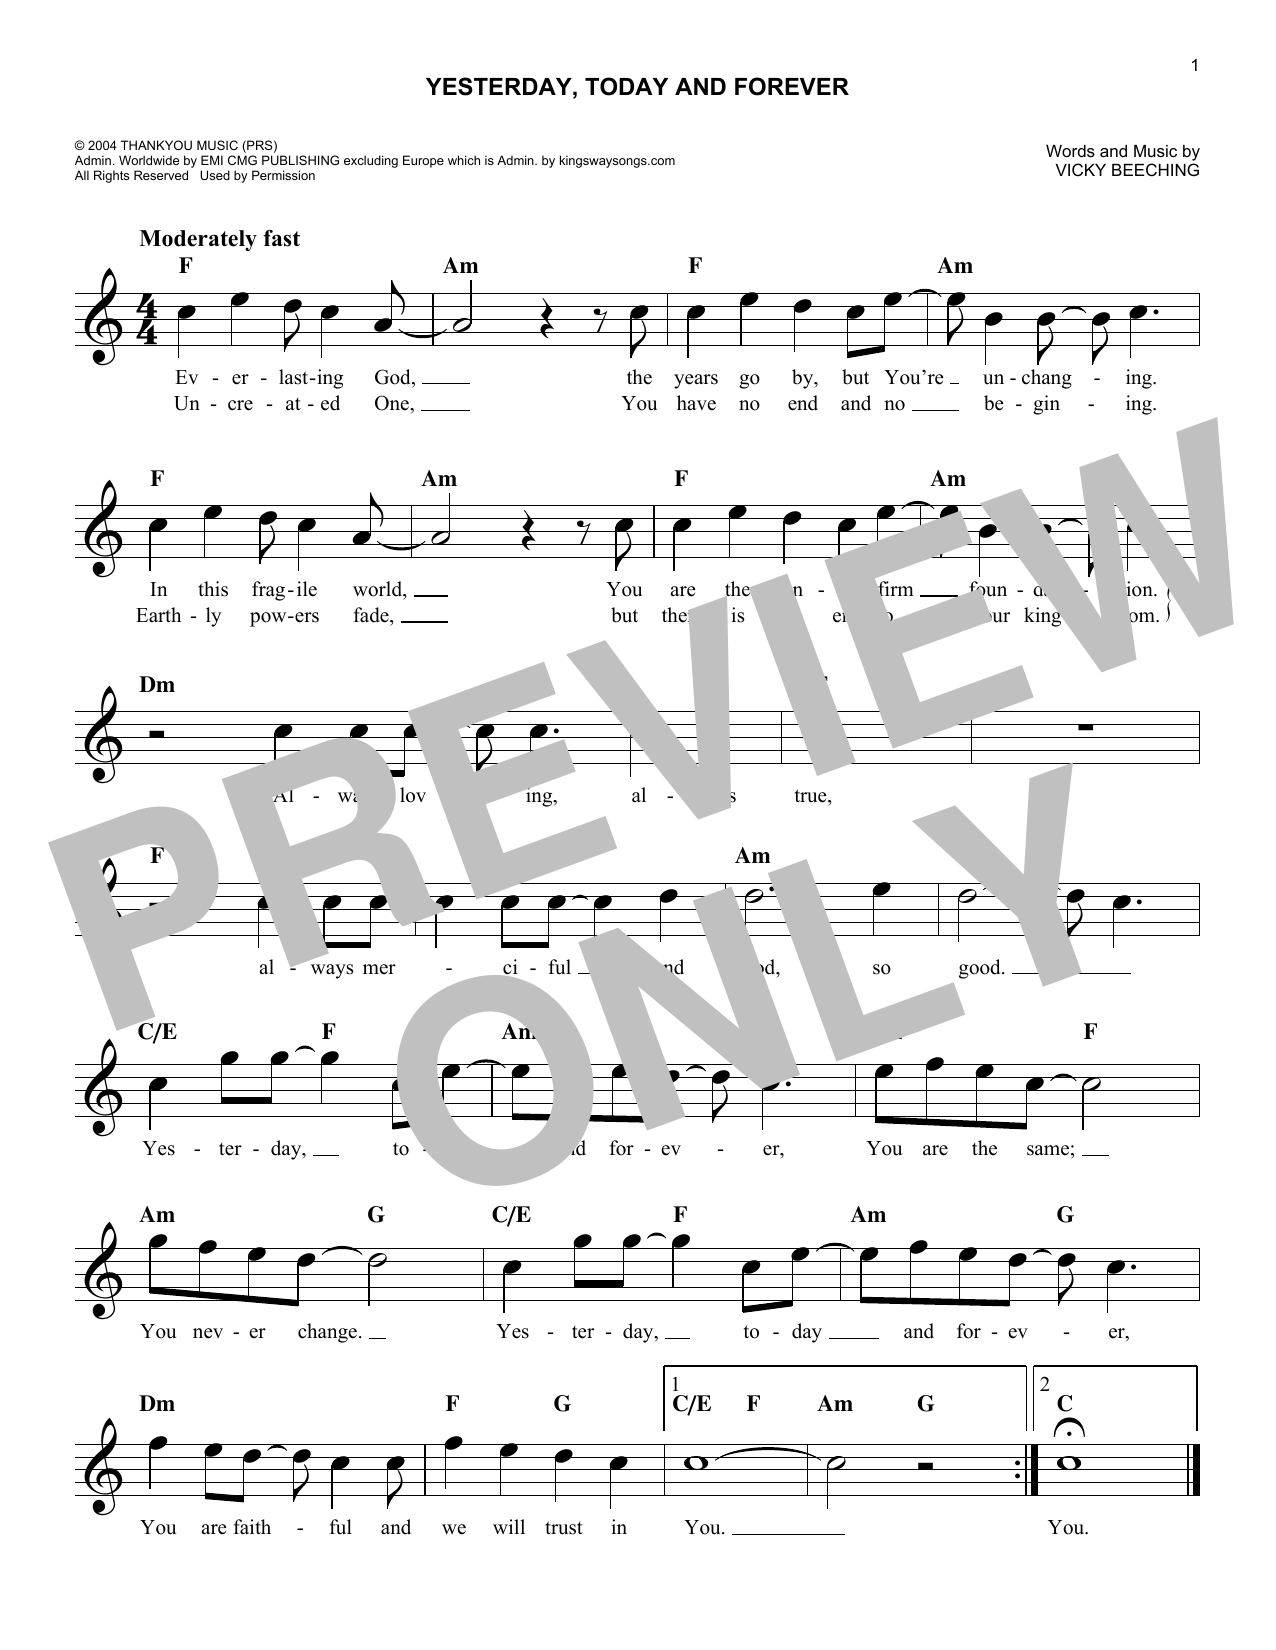 Download Vicky Beeching Yesterday, Today And Forever Sheet Music